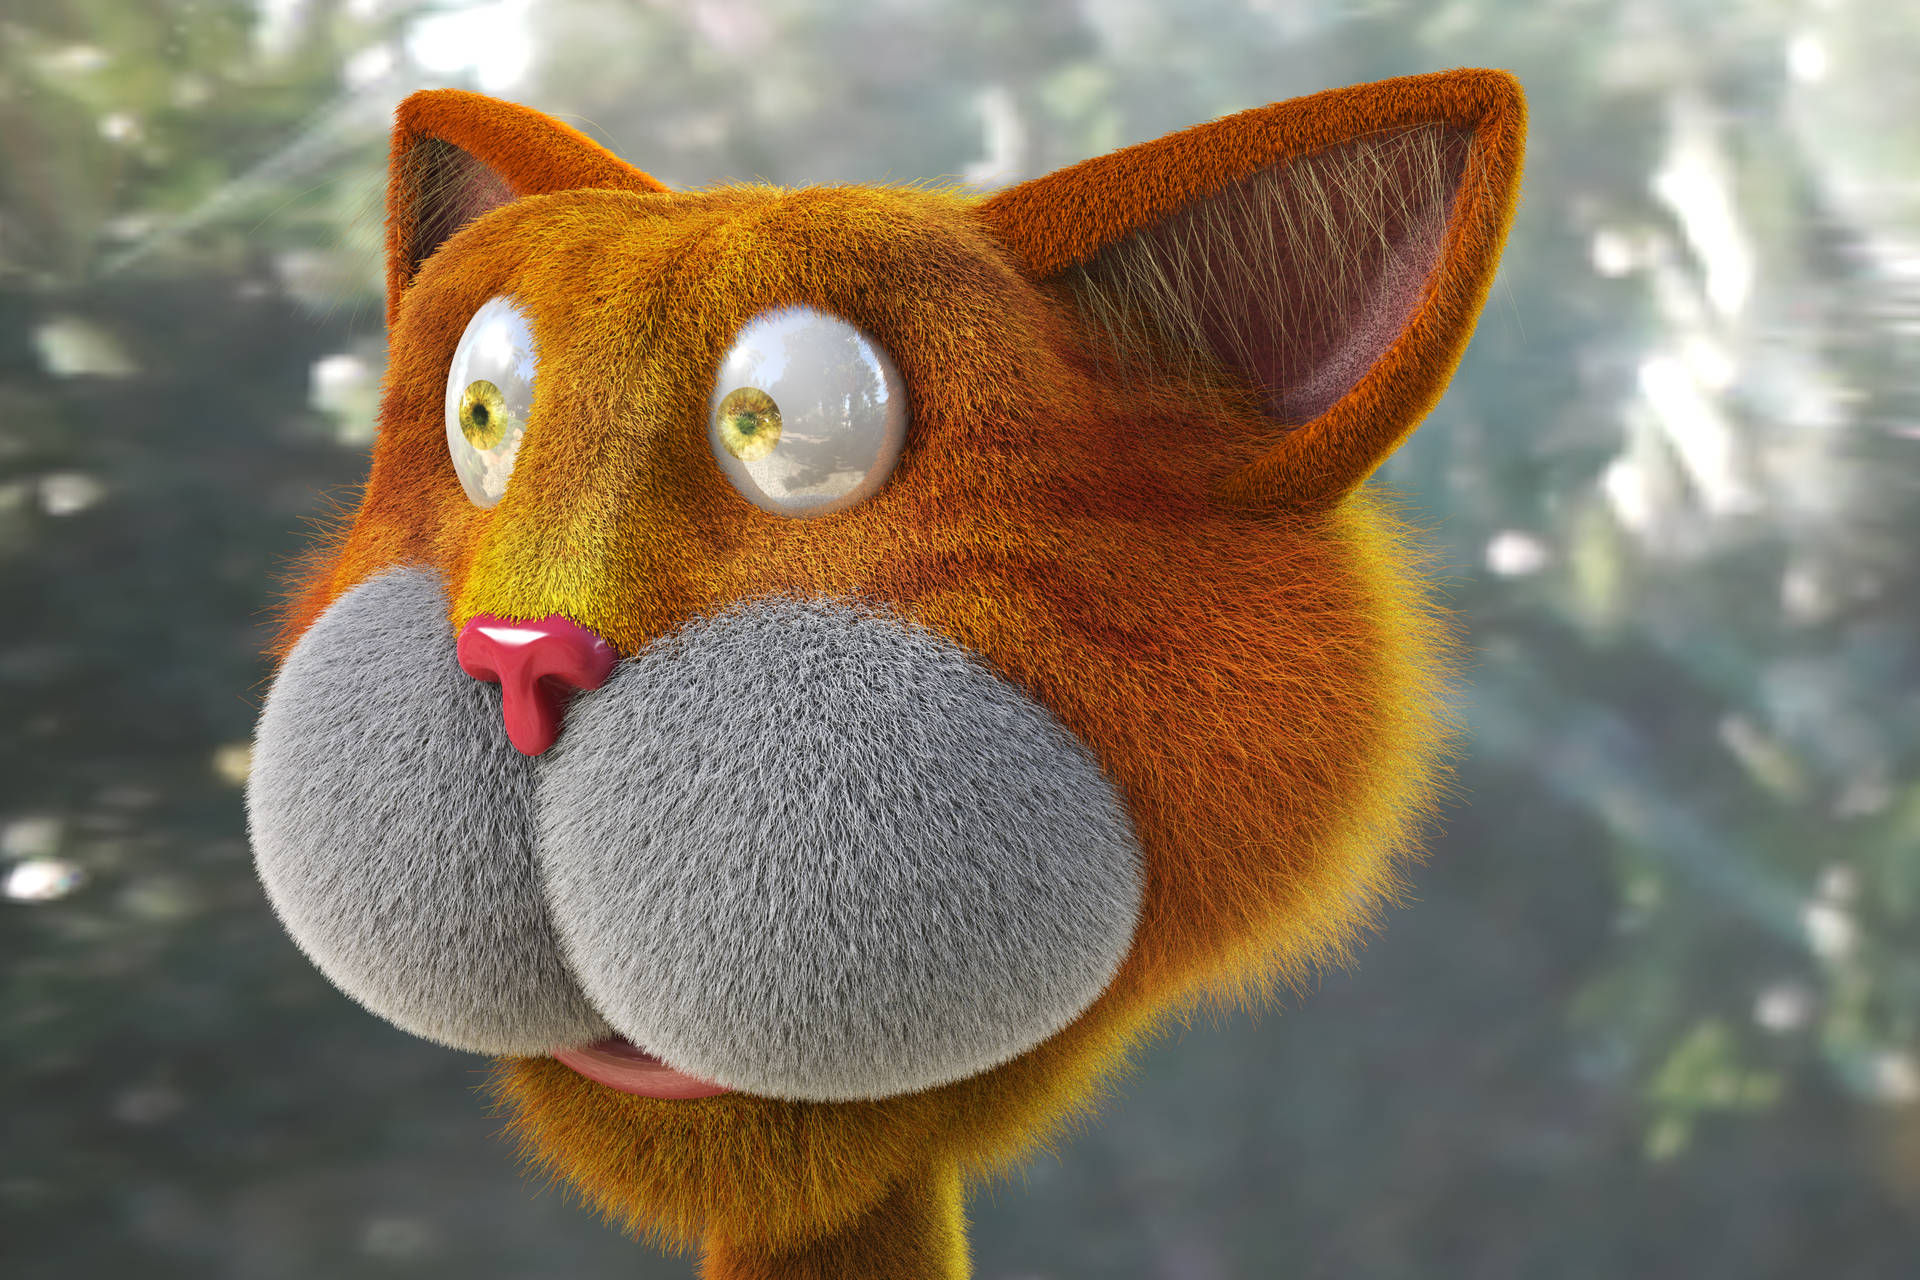 This Adorably Lifelike 3d Orange Cat Will Brighten Your Day! Wallpaper